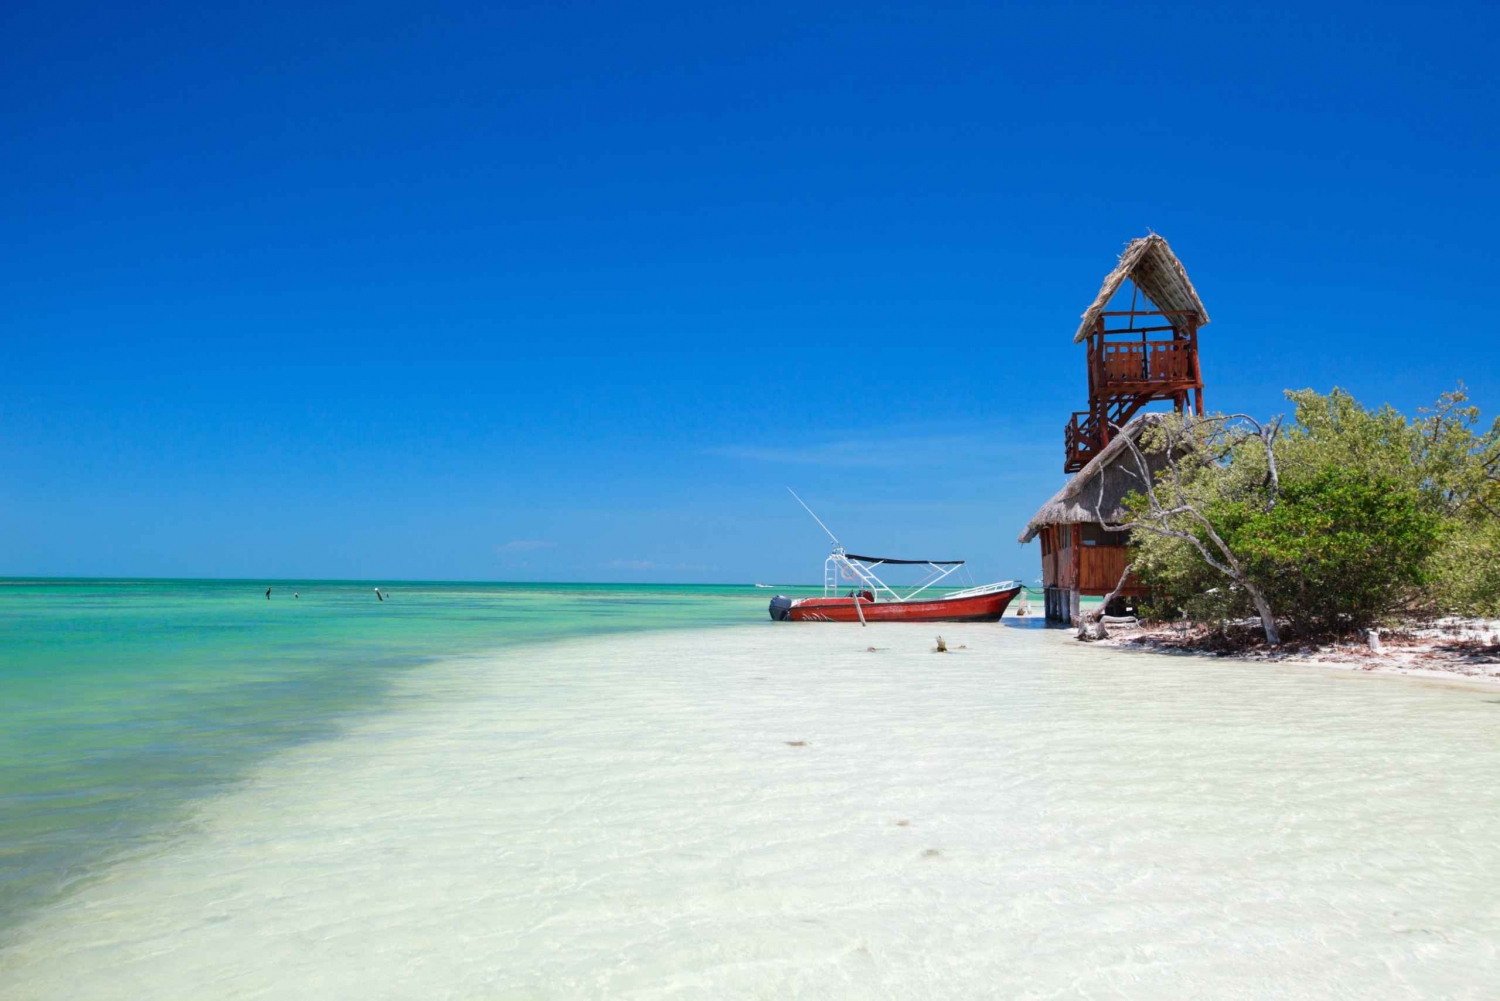 From Riviera Maya: Holbox Full-Day Tour with Lunch